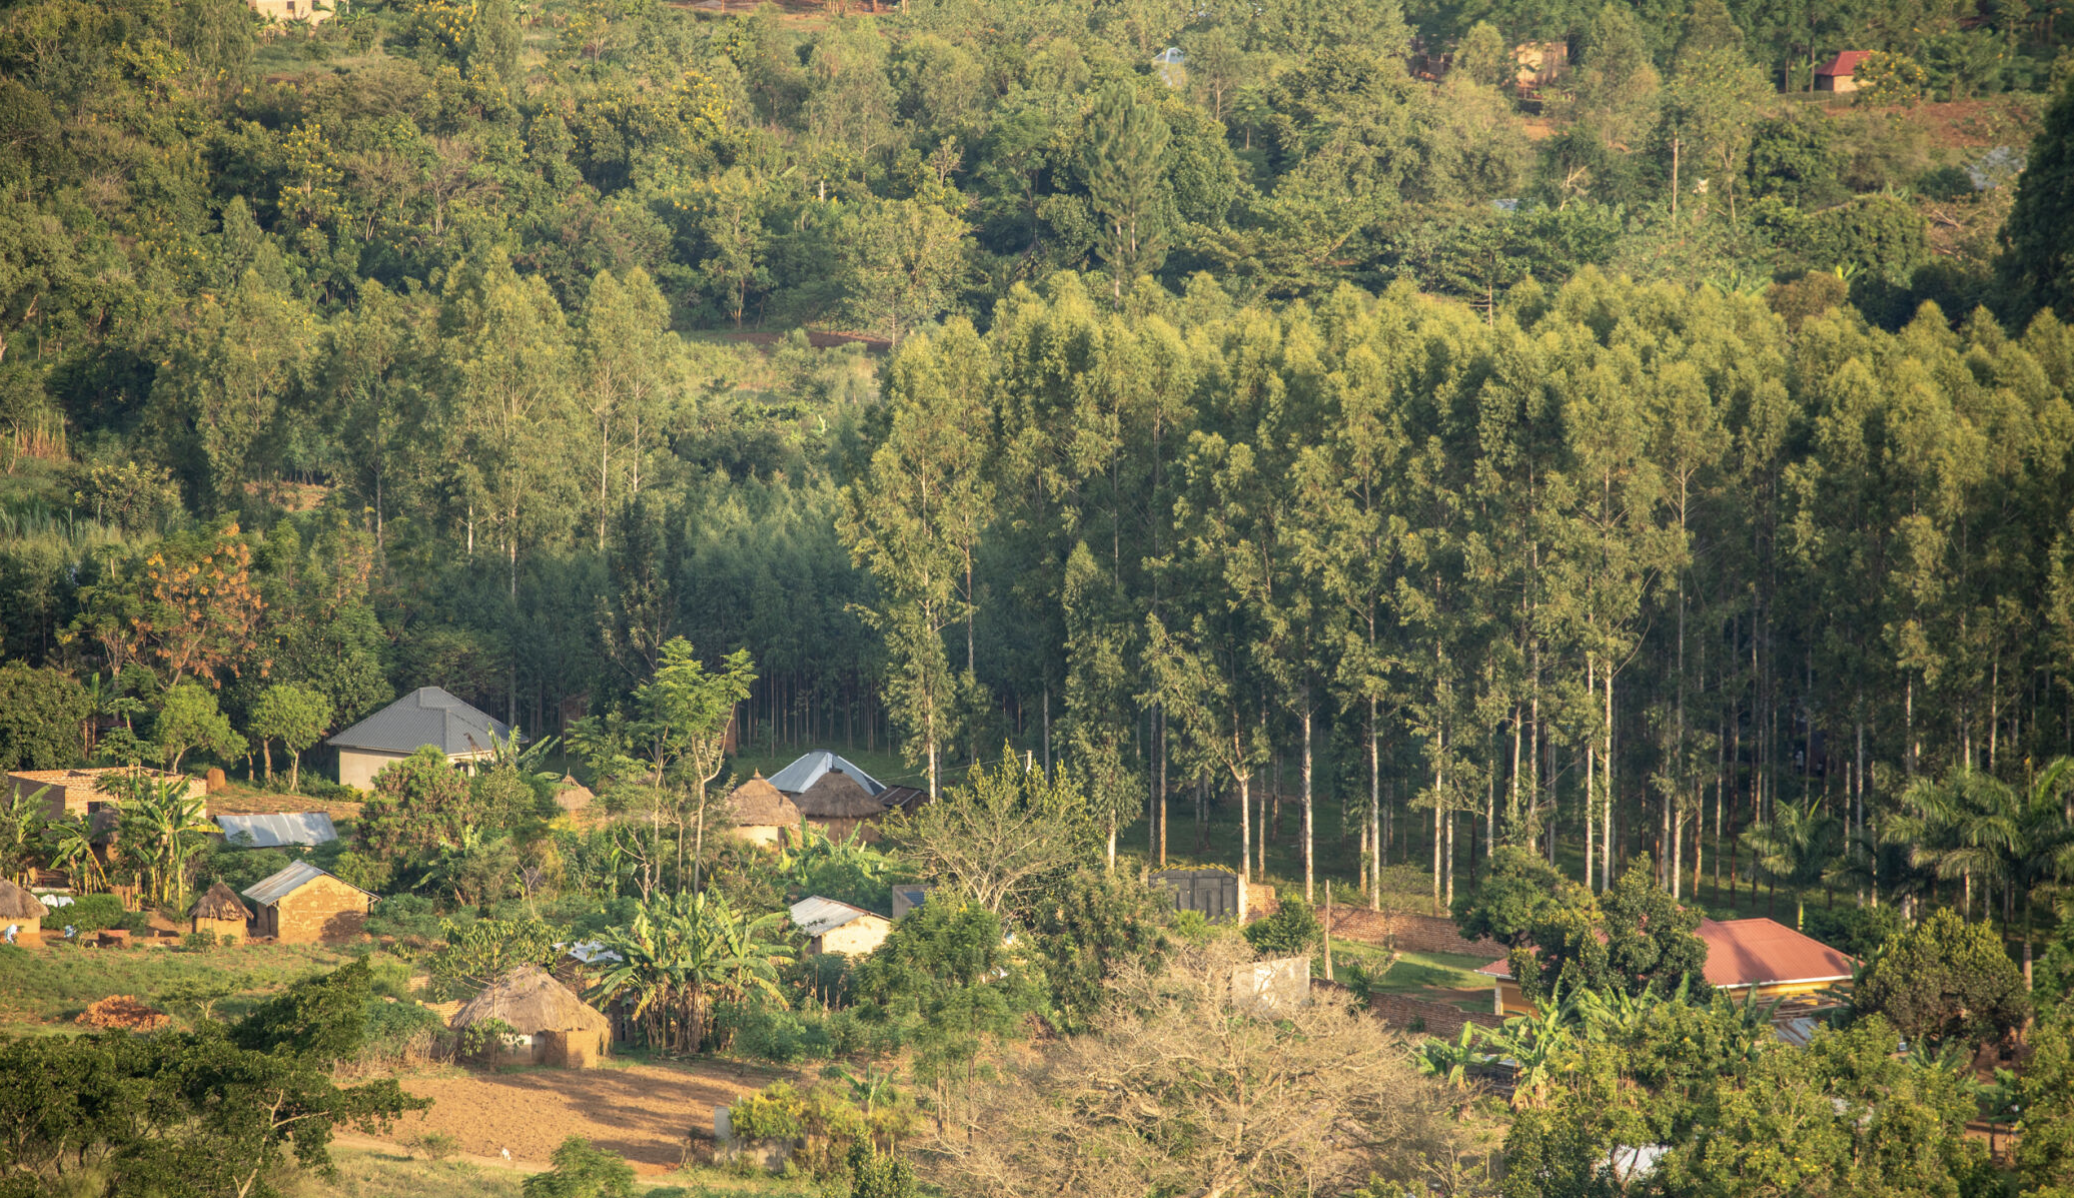 image of West Bugwe Forest Central reserve and community in Uganda = trees and some small houses